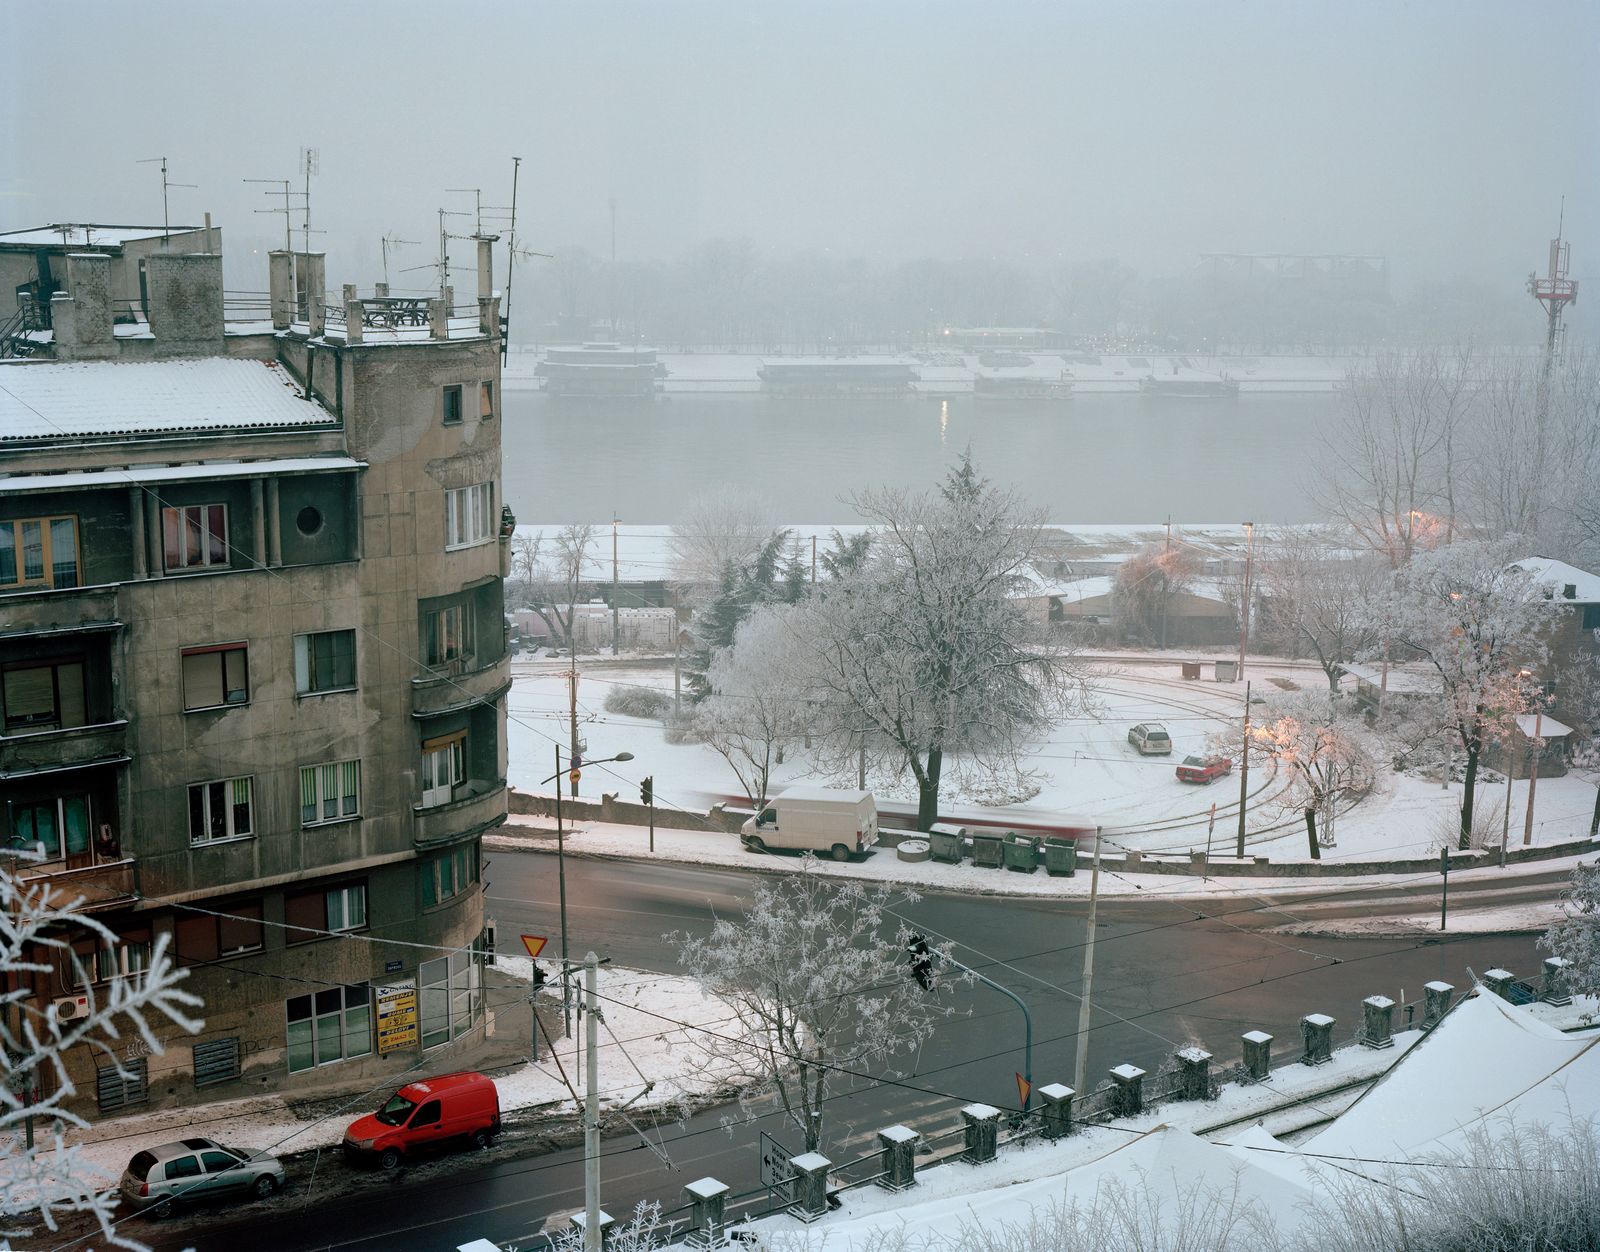 © Andy Ash - Image from the New Belgrade photography project